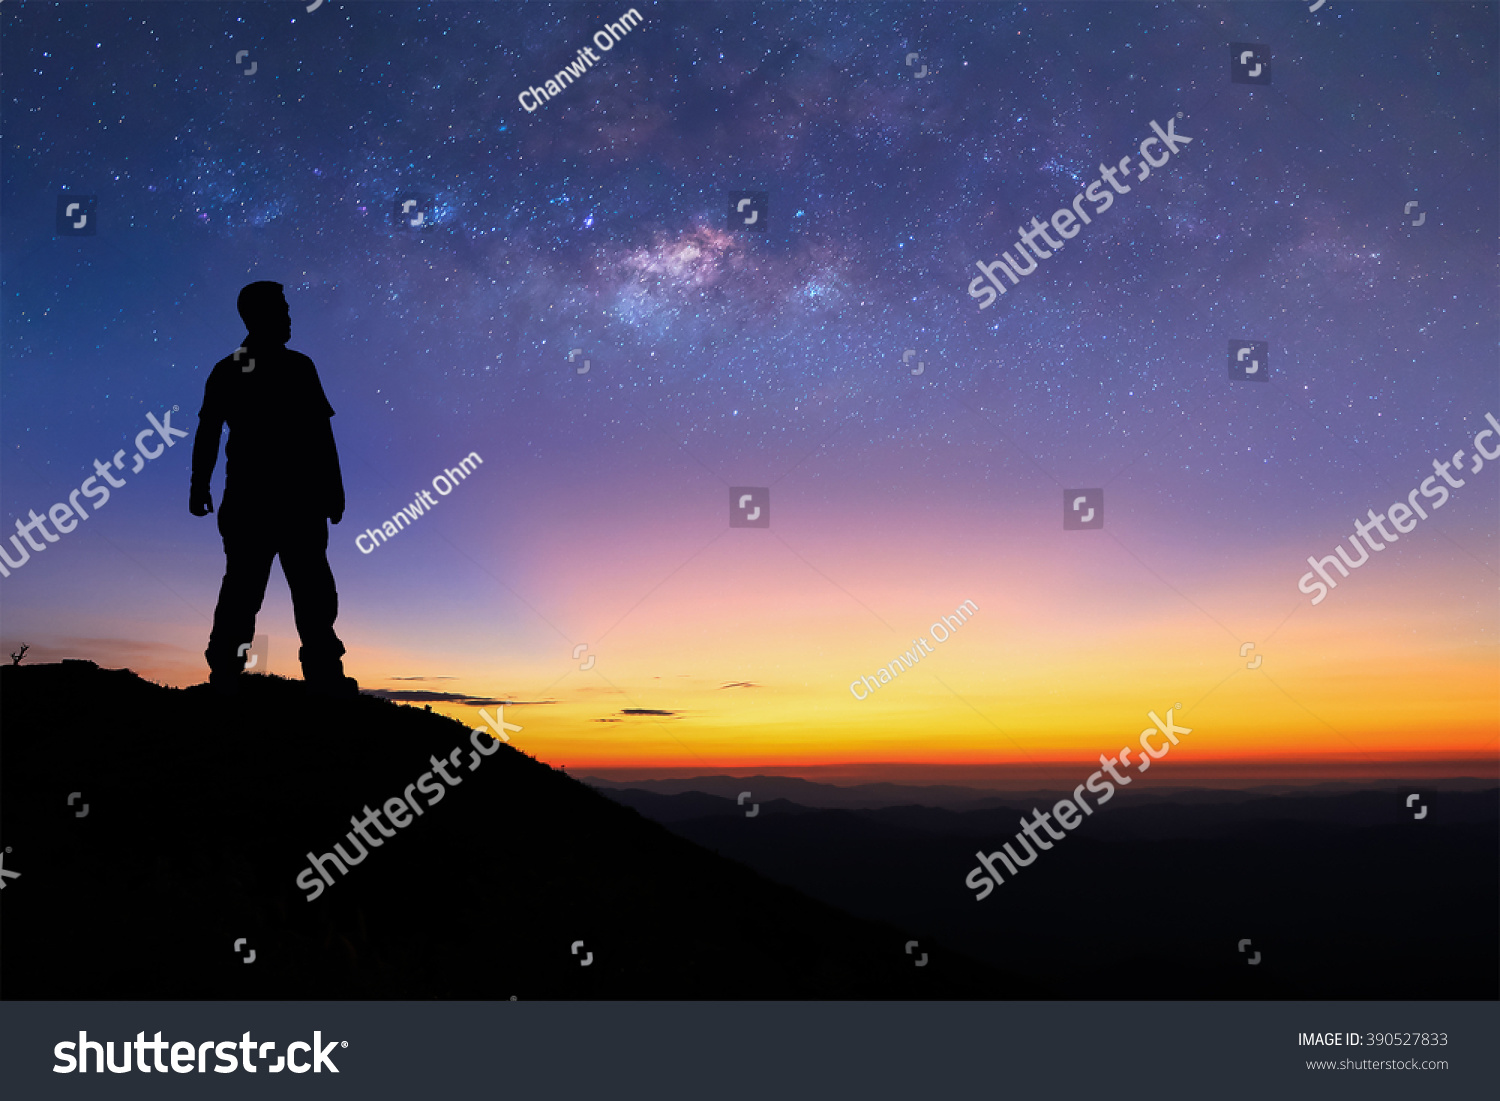 Silhouette of man is standing on top of mountain and enjoy to see the milky way before sunrise. Young tourist stand on the hill with colorful night sky on background. #390527833